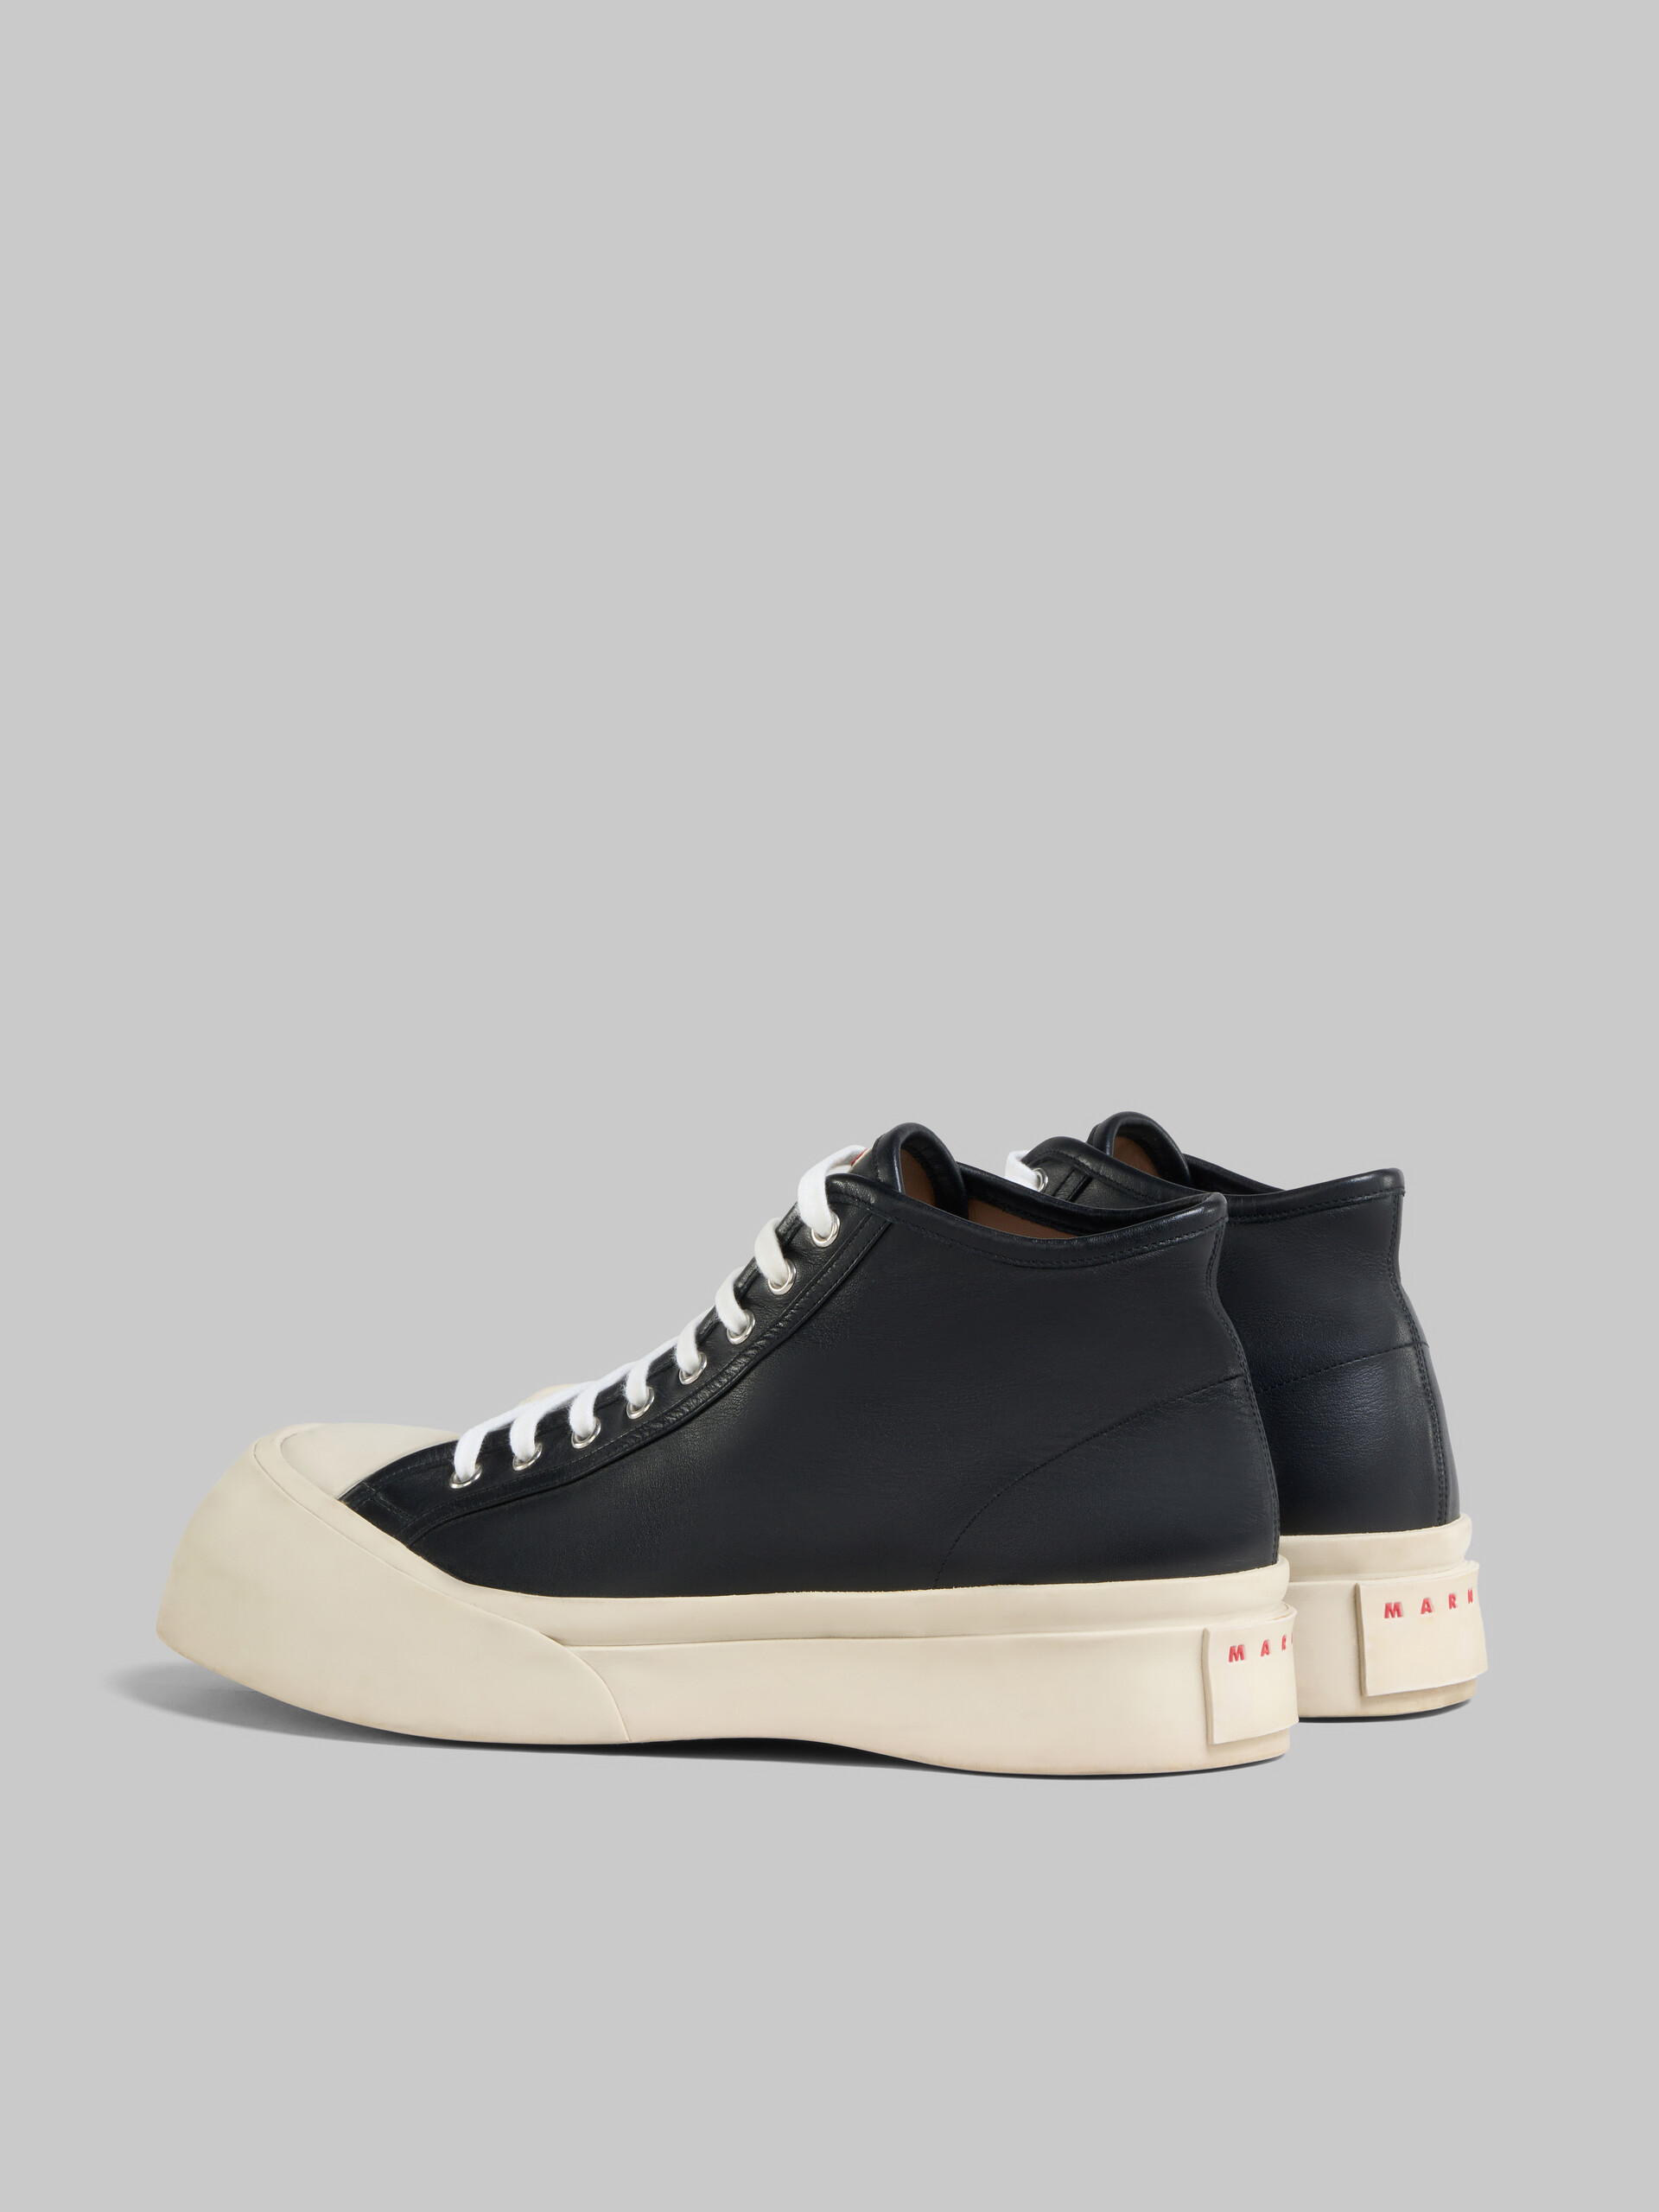 Black nappa leather Pablo high-top sneaker - Sneakers - Image 3